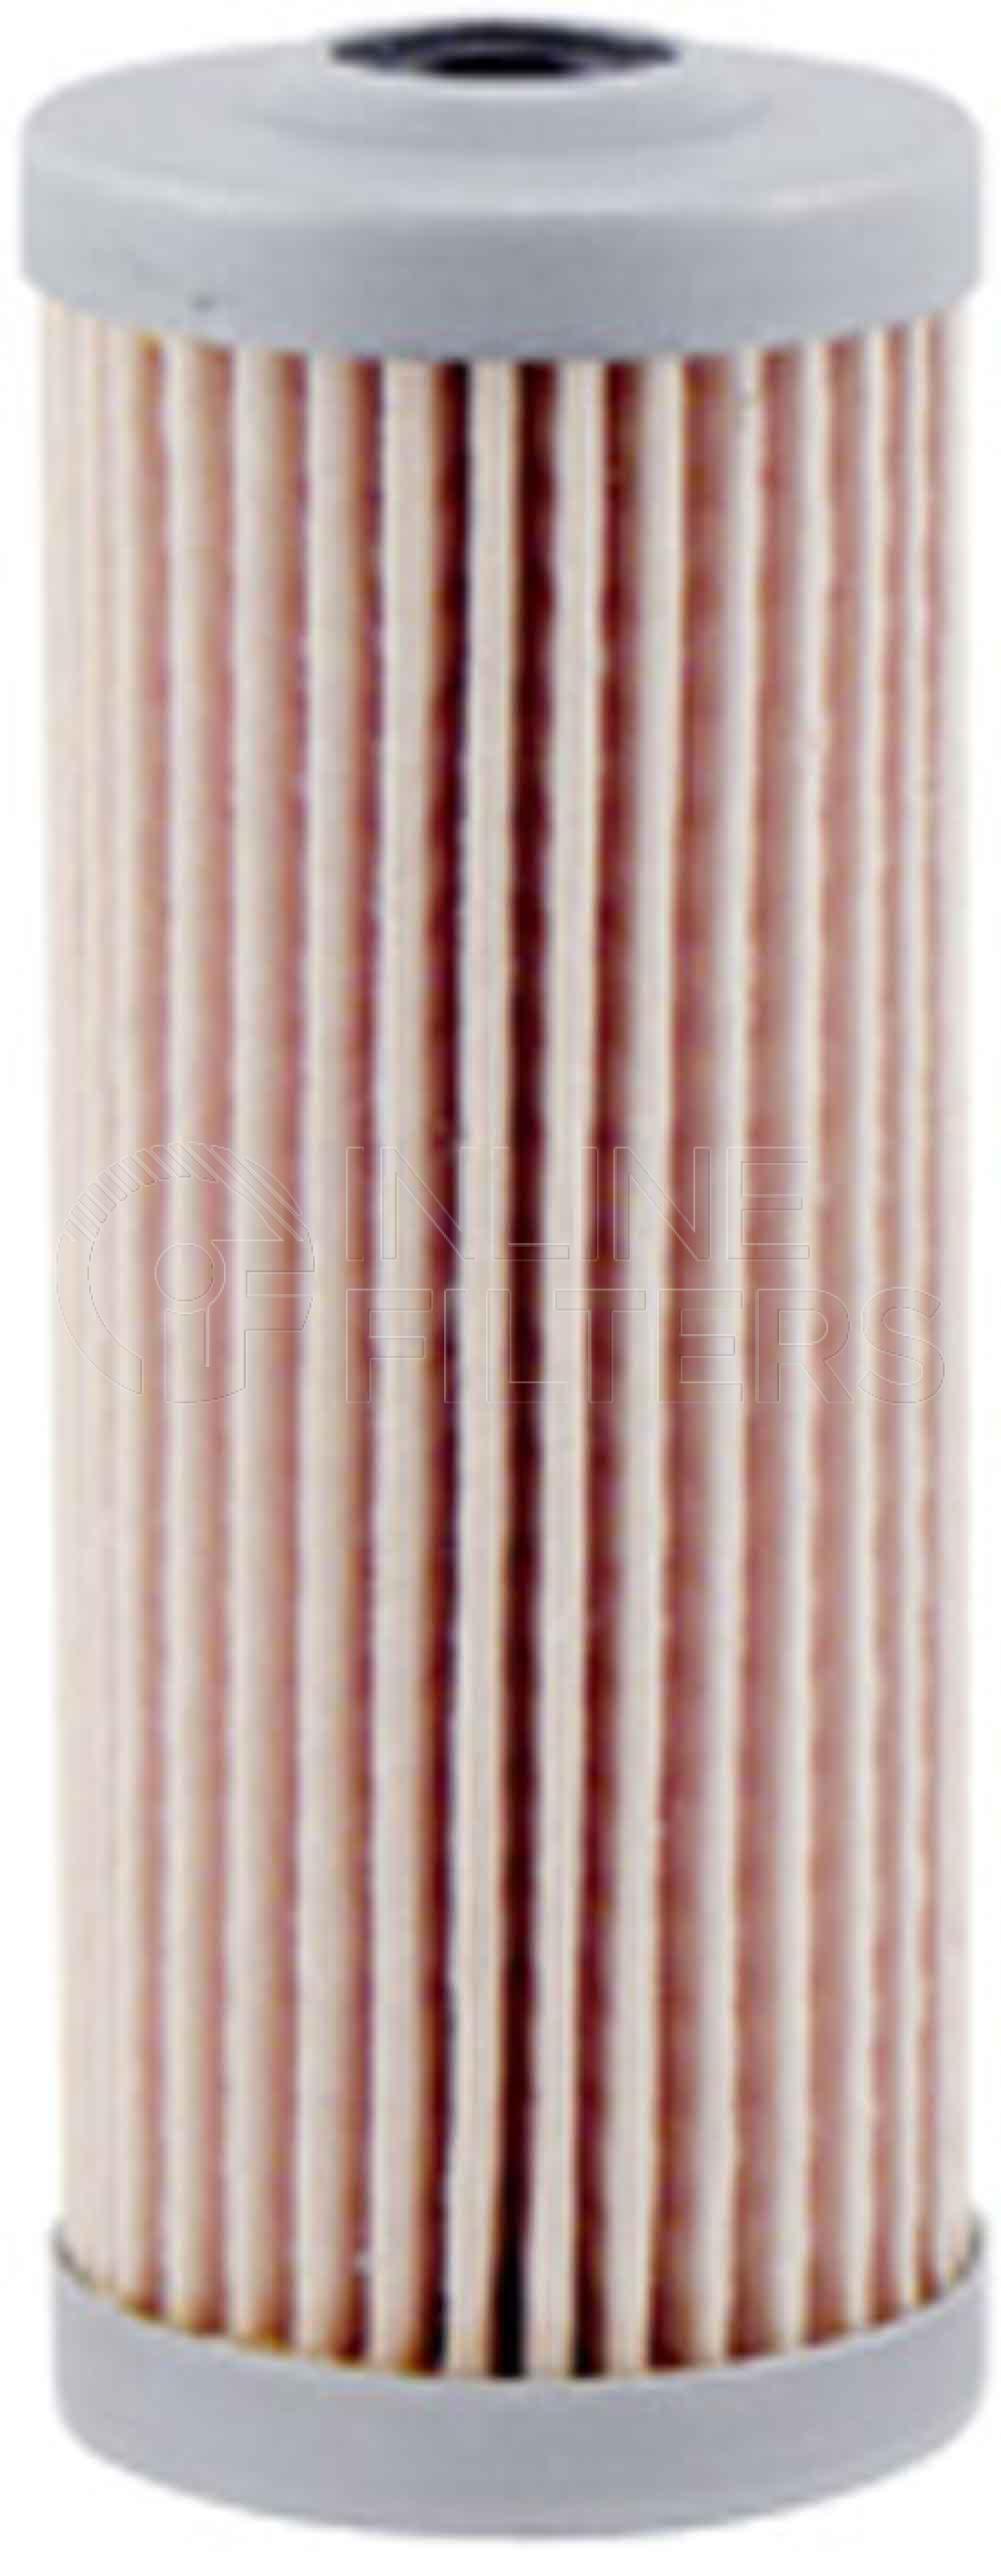 Pack of 3 Killer Filter Replacement for BALDWIN BF783 